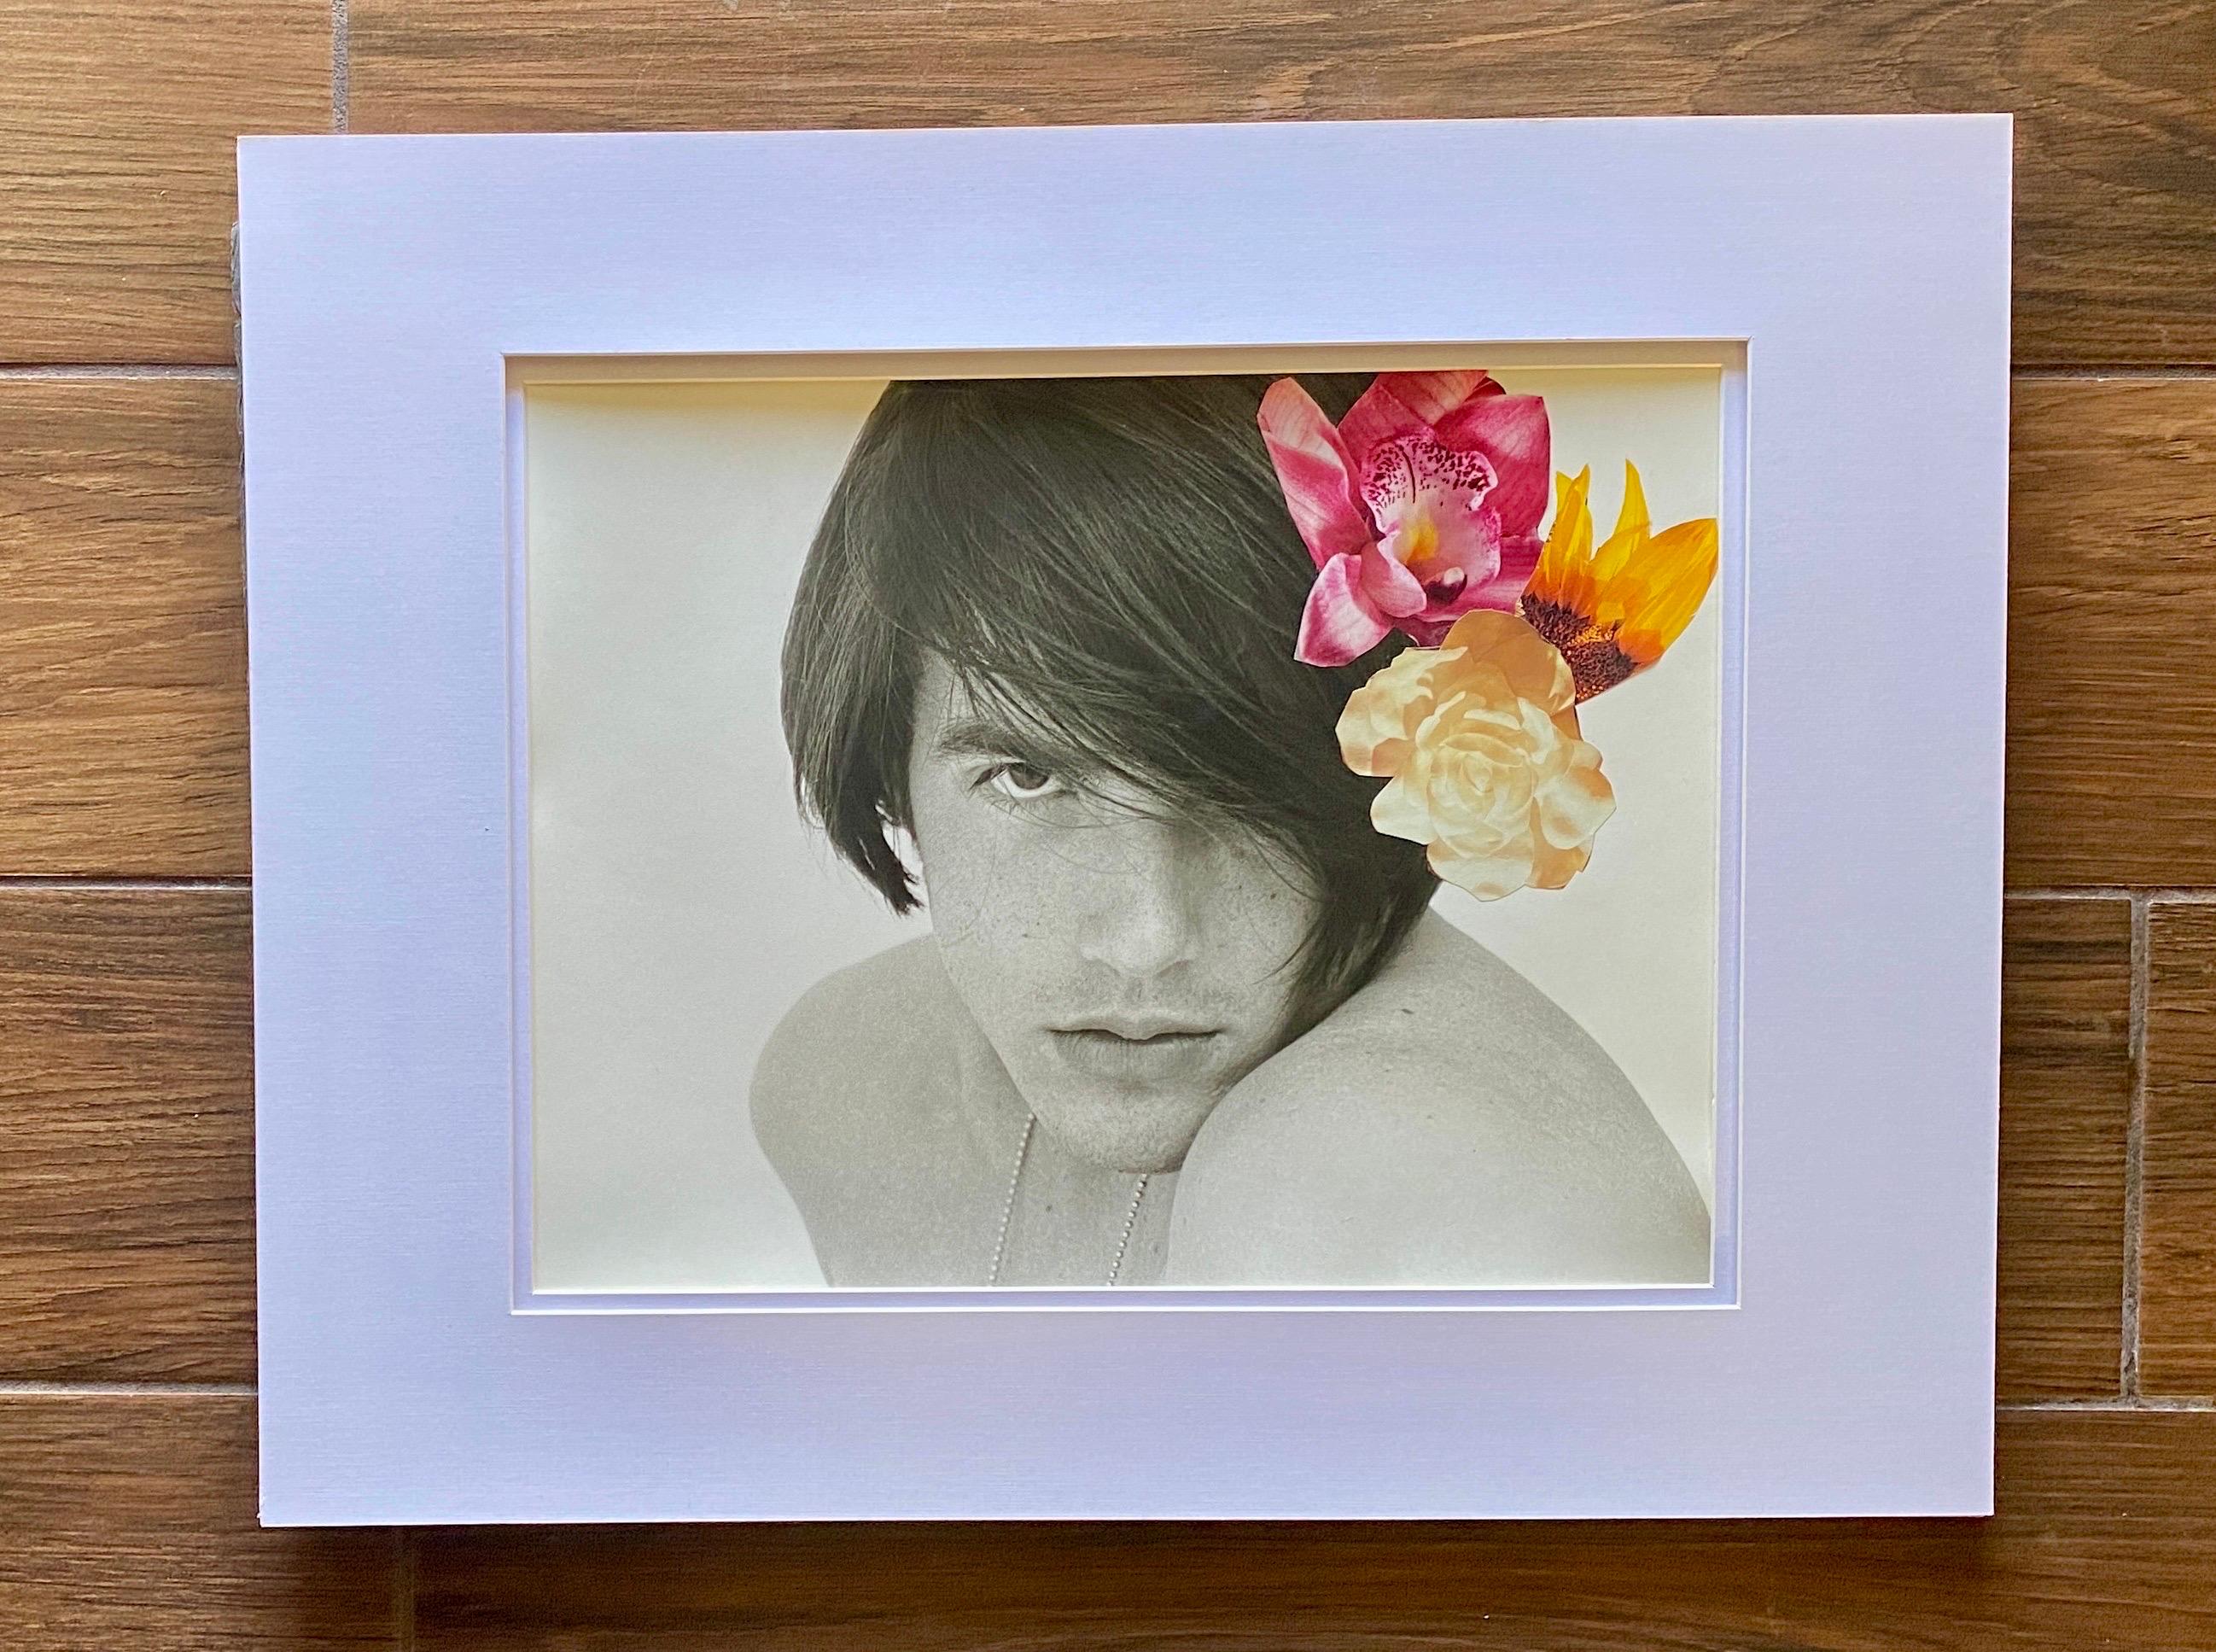 Hand-Crafted George Machado Orig B&WPhotograph Male Portrait “One of a Kind Collage” Series For Sale